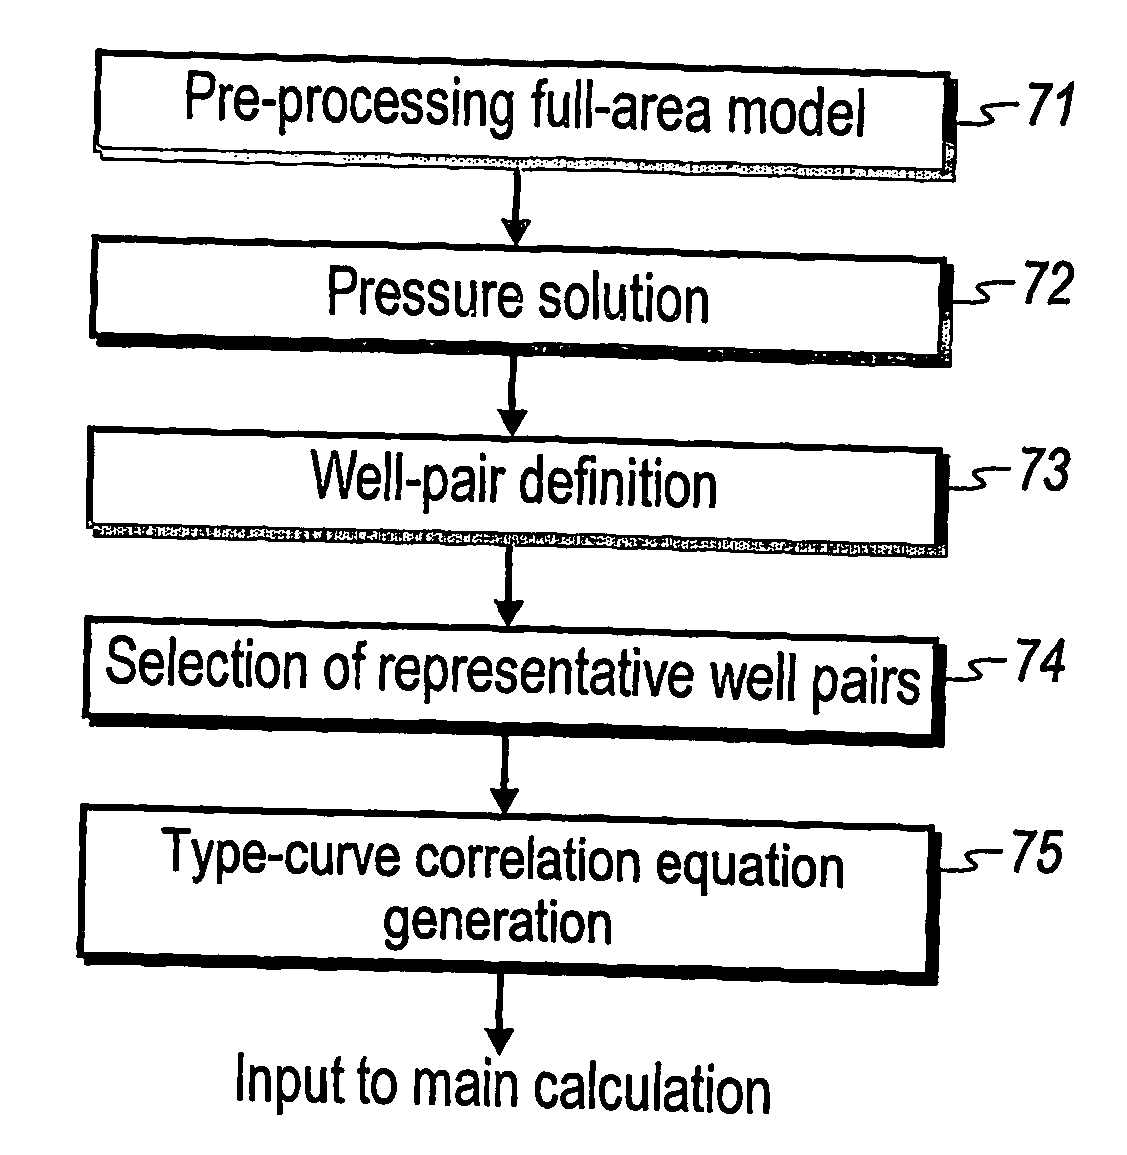 Performance prediction method for hydrocarbon recovery processes